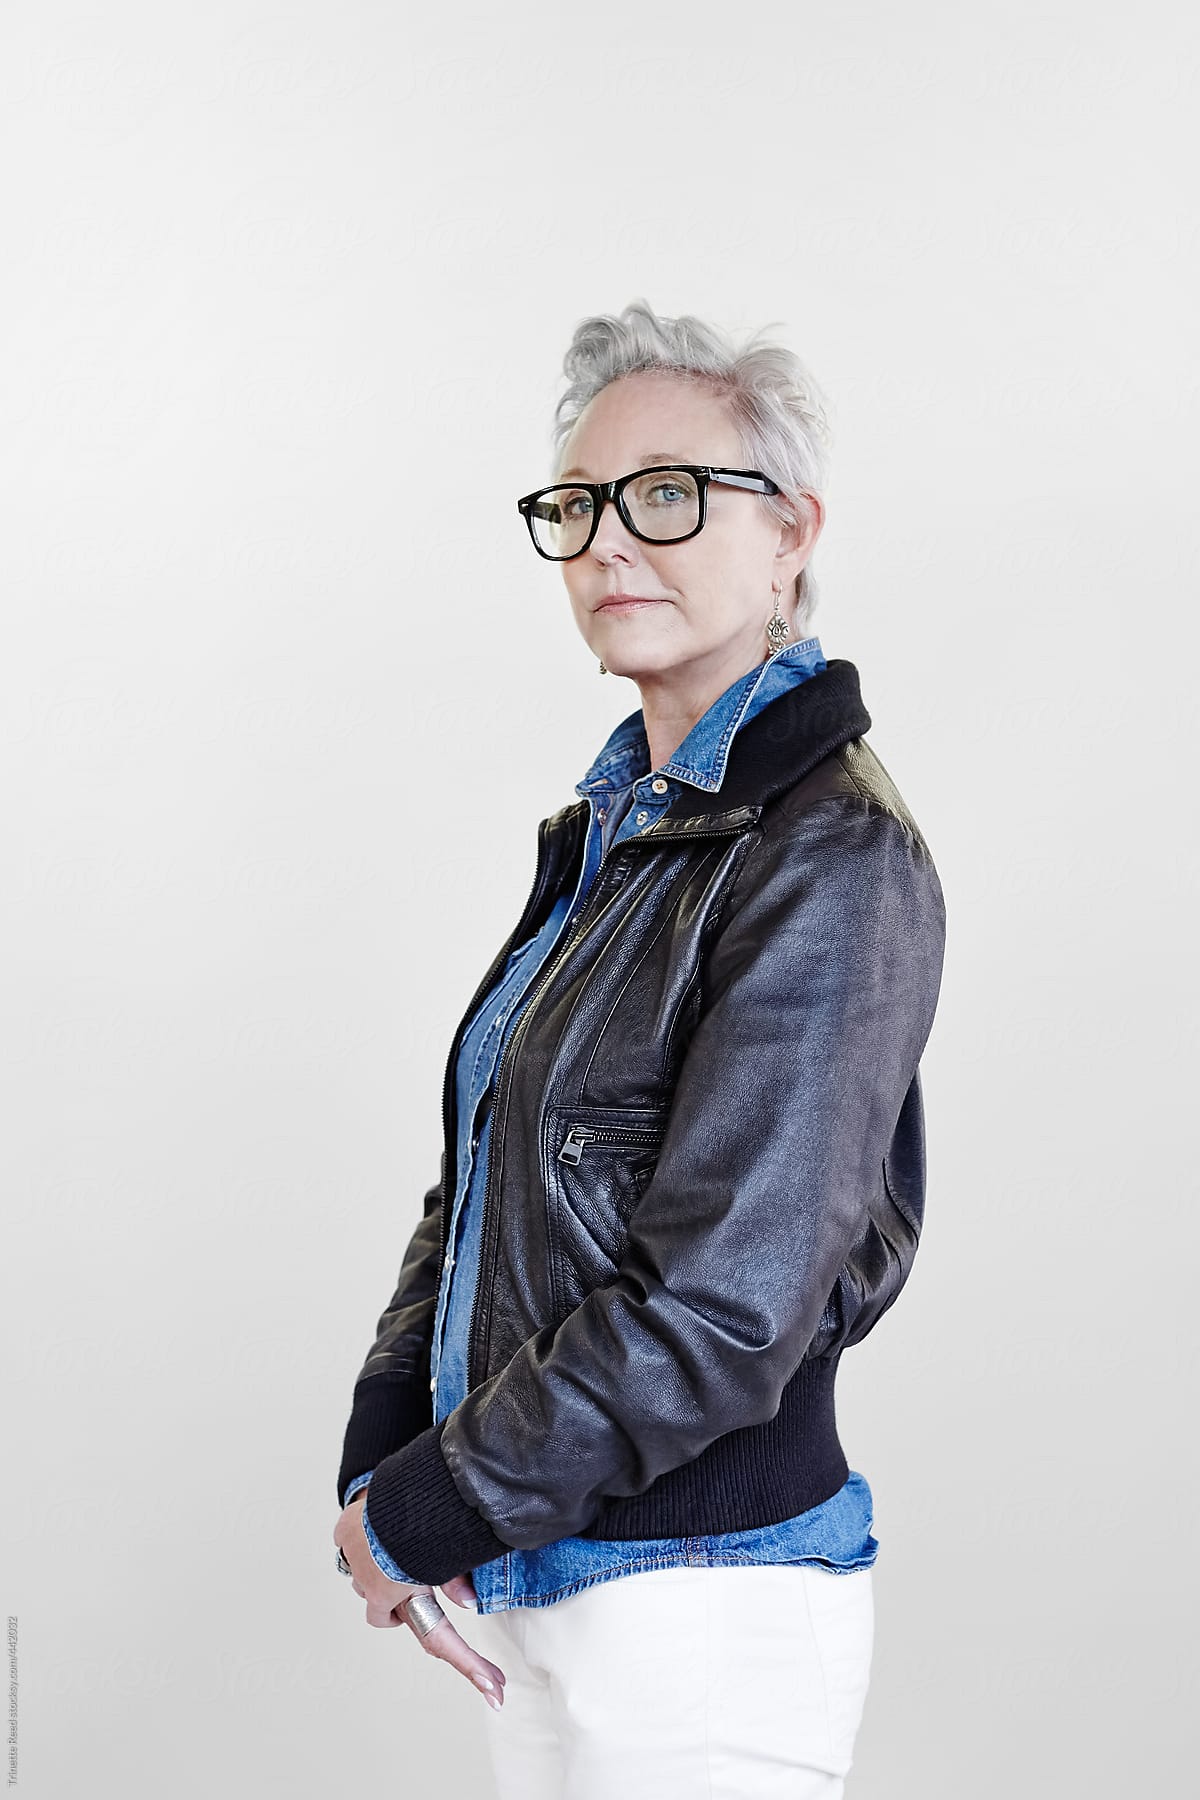 Portrait of stylish mature woman with grey hair